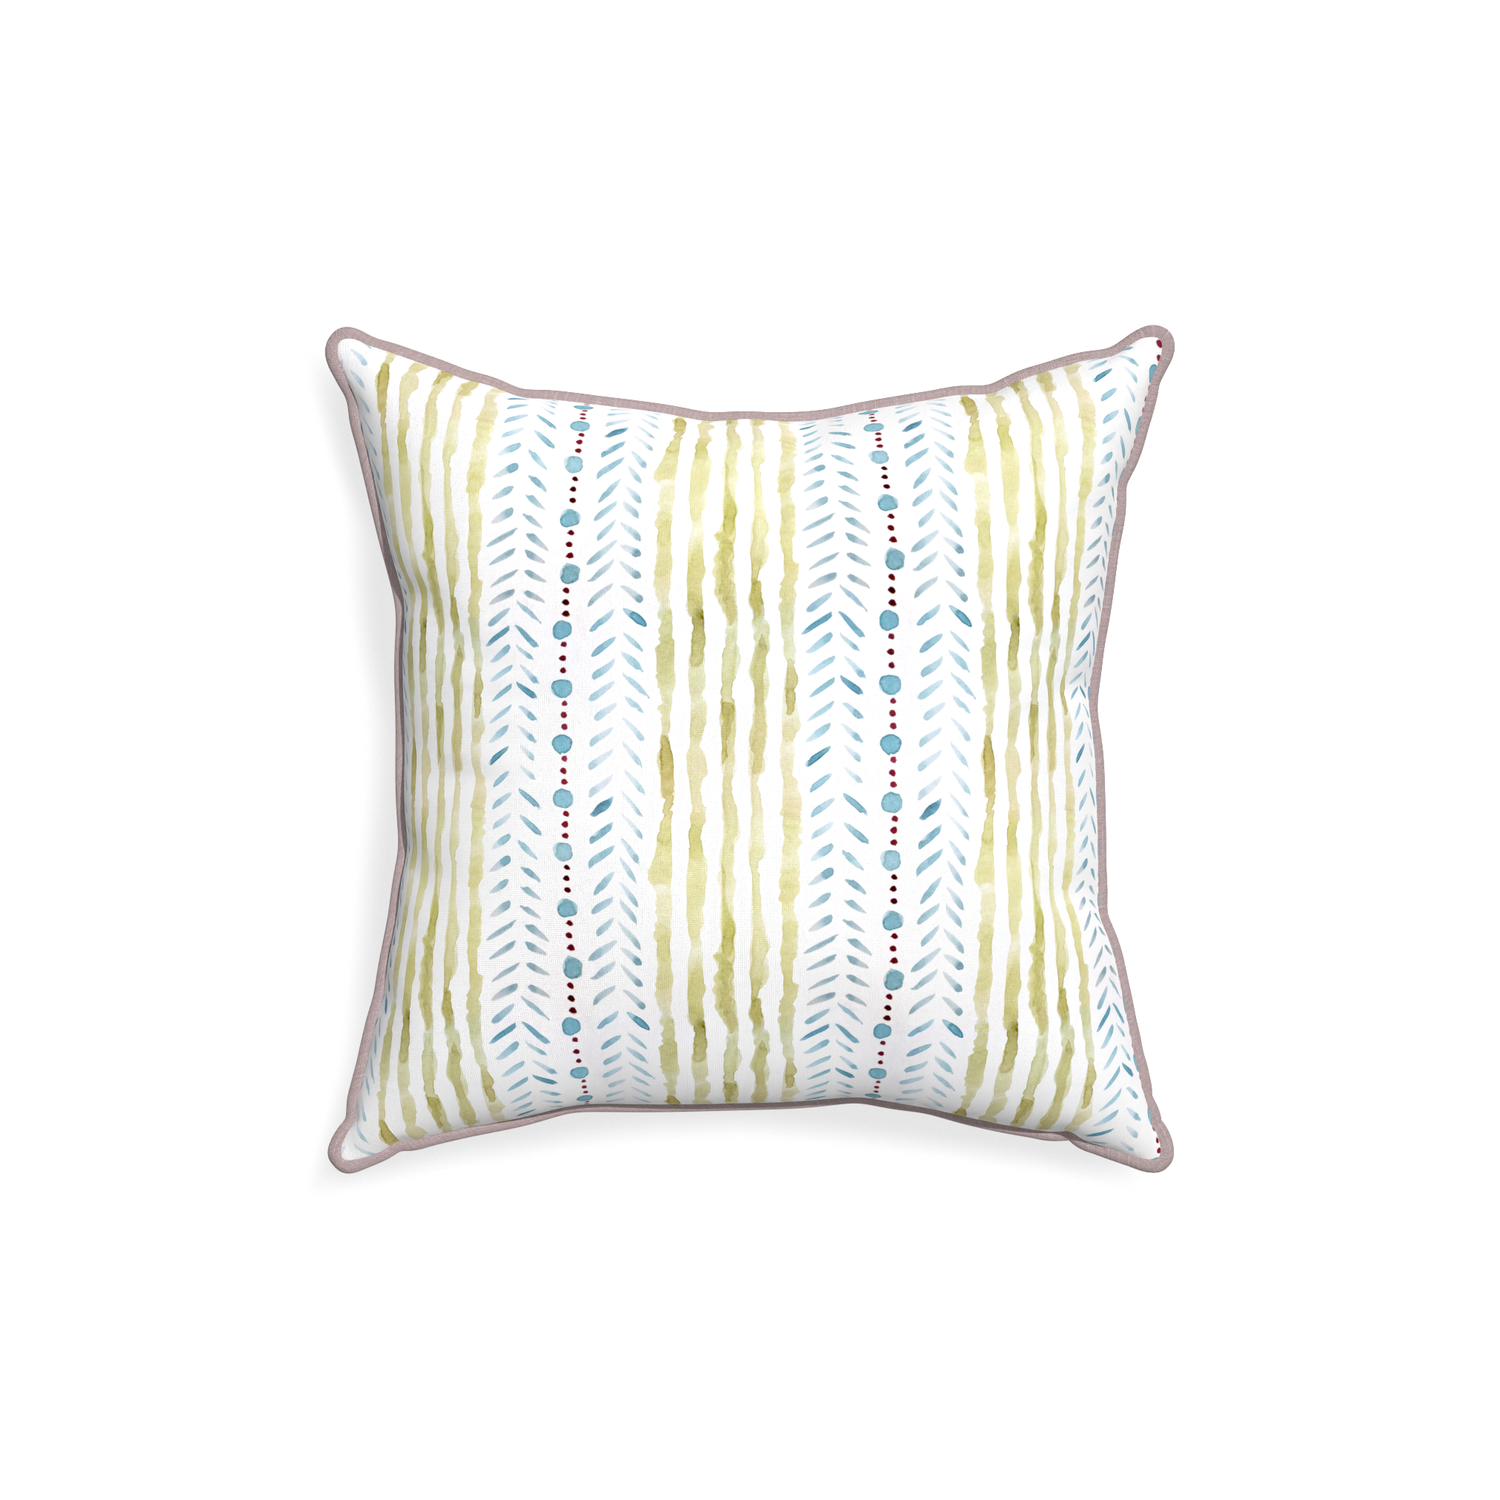 18-square julia custom blue & green stripedpillow with orchid piping on white background